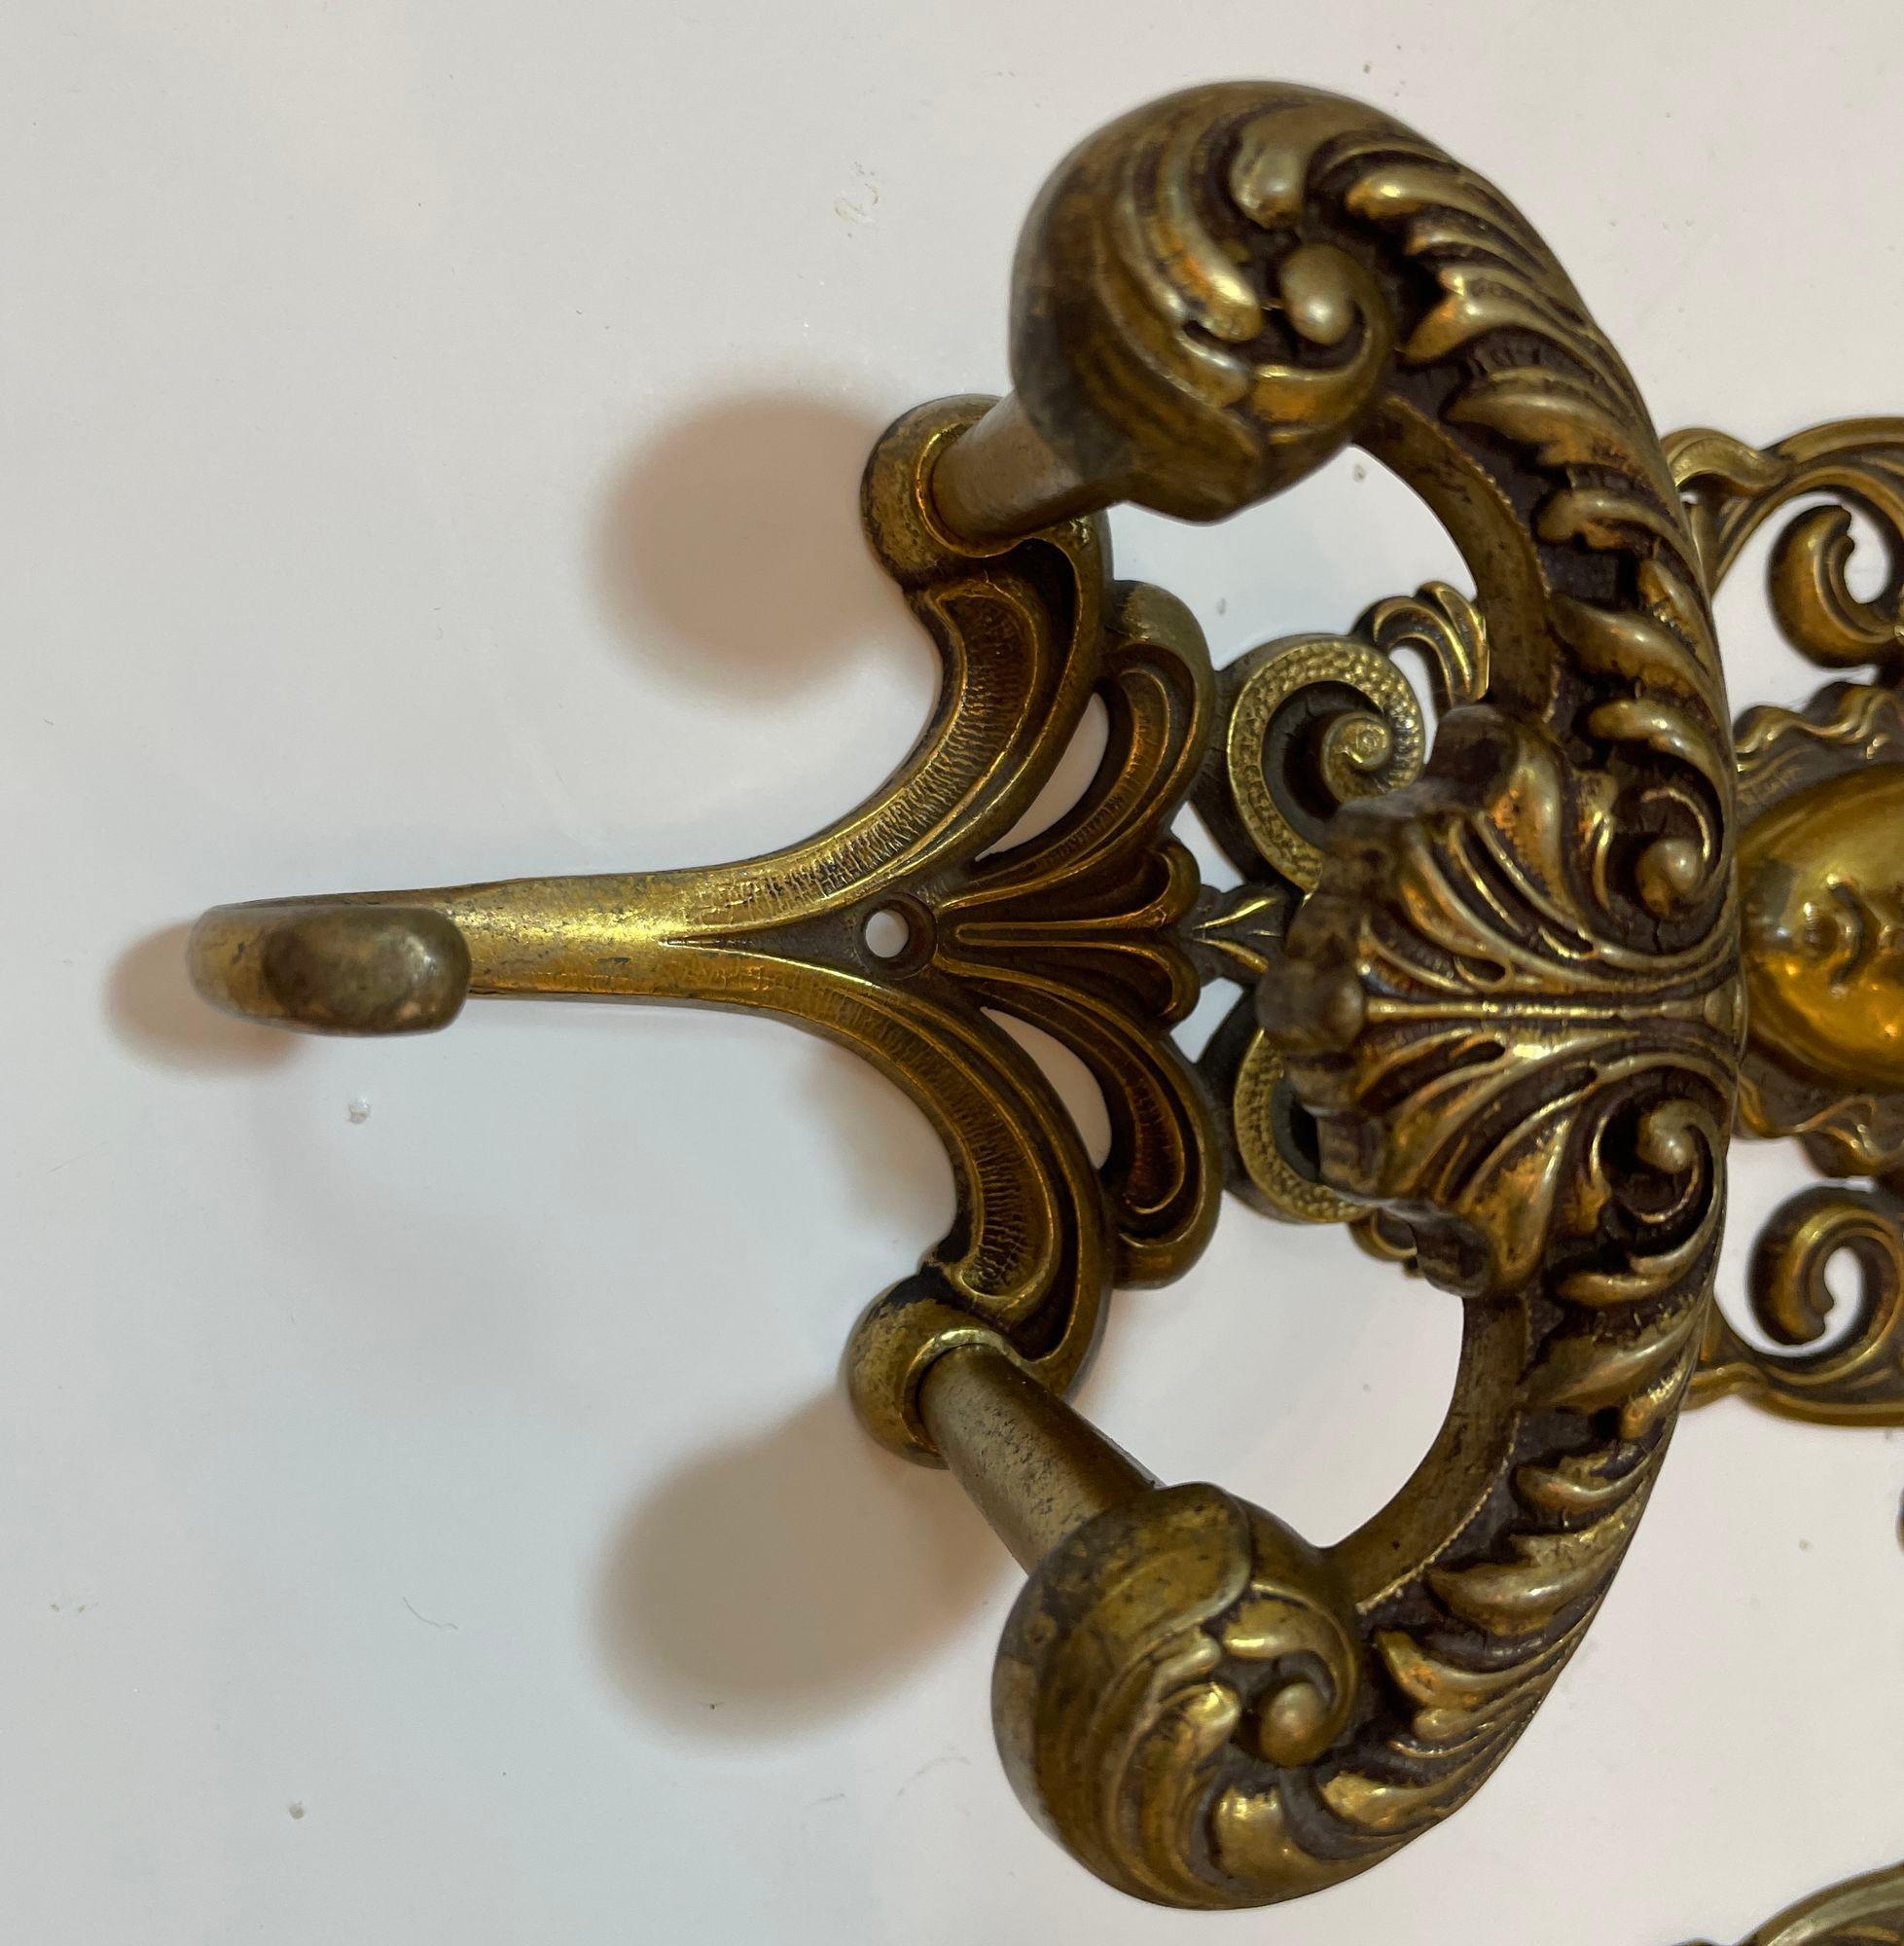 Antique Ornate Italian Figural Architectural Cast Brass Wall Hook Decor Set of 3 For Sale 4